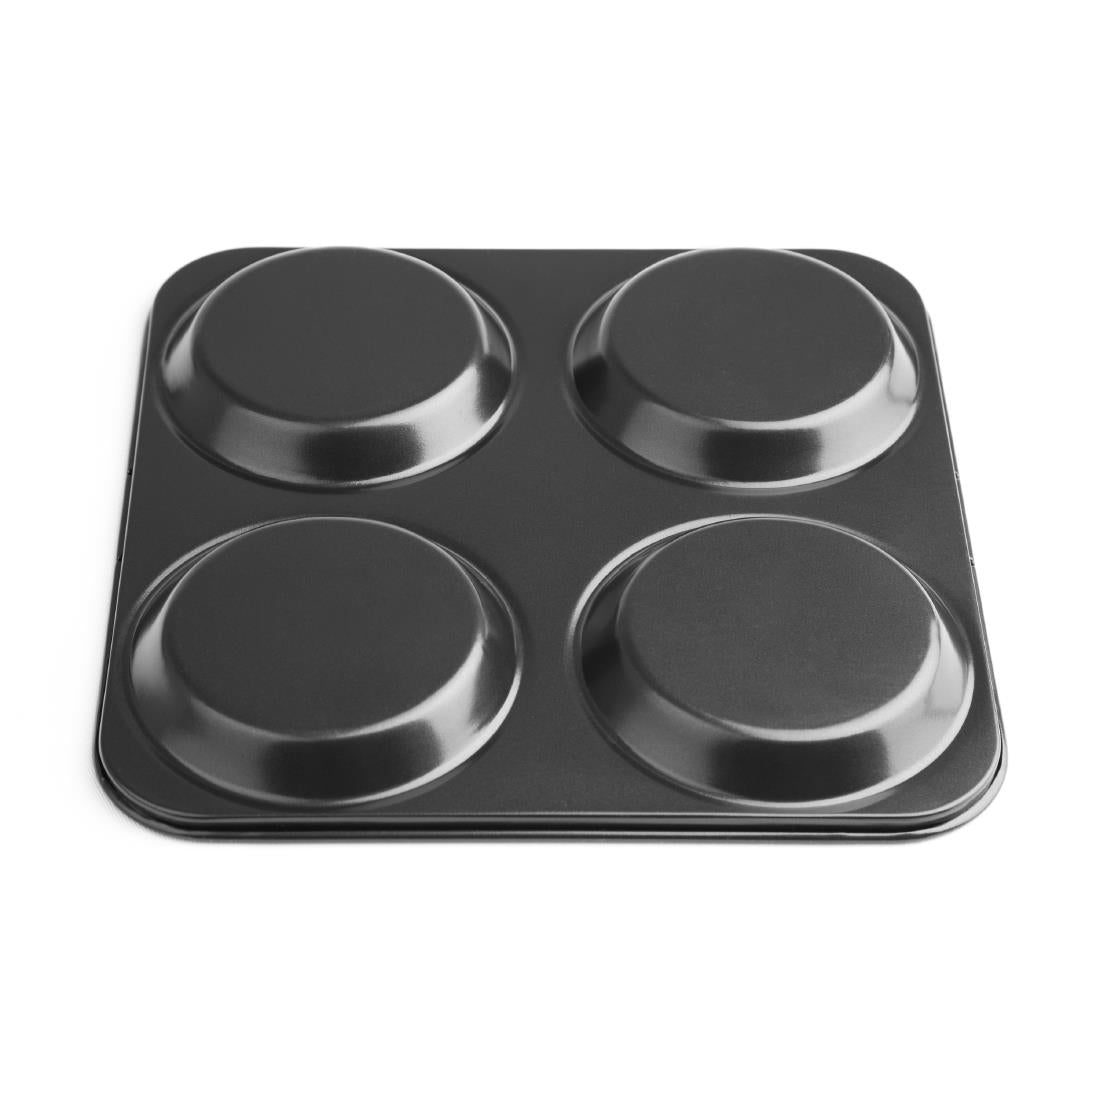 GD012 Vogue Carbon Steel Non-Stick Yorkshire Pudding Tray 4 Cup JD Catering Equipment Solutions Ltd